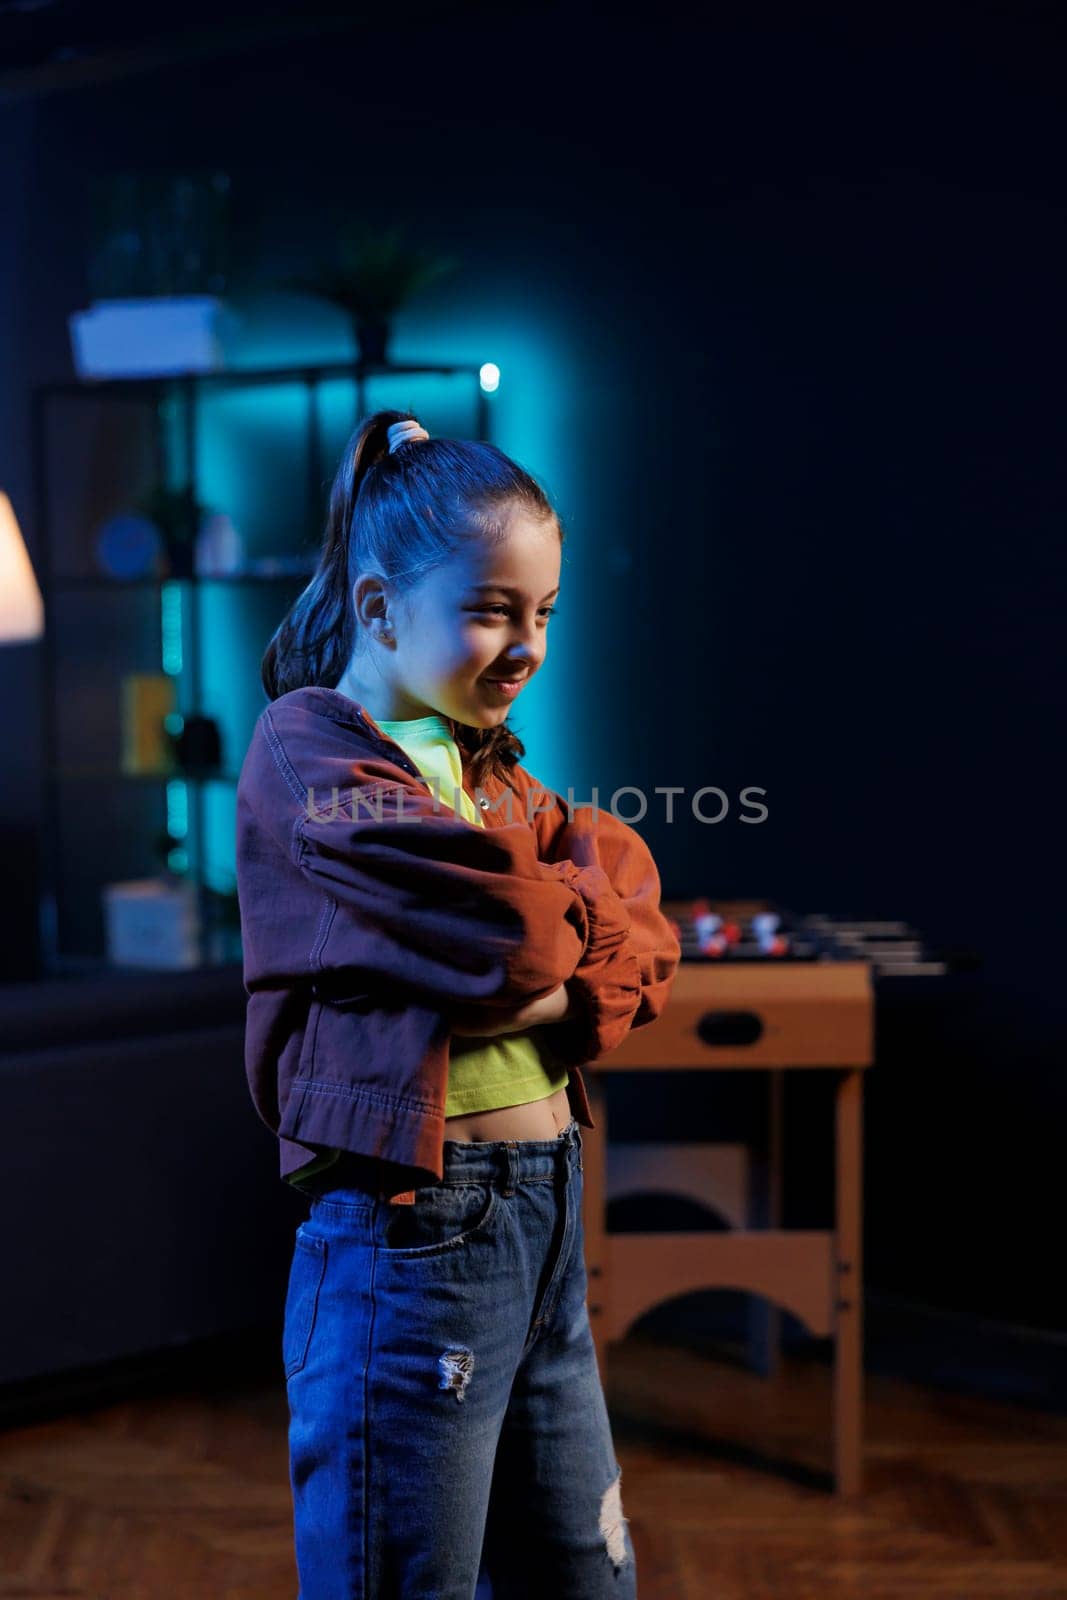 Young child in dimly lit studio doing viral dance for social media platforms while listening to popular hit song. Cute gen Z girl recording dancing video for her internet fans on latest viral music